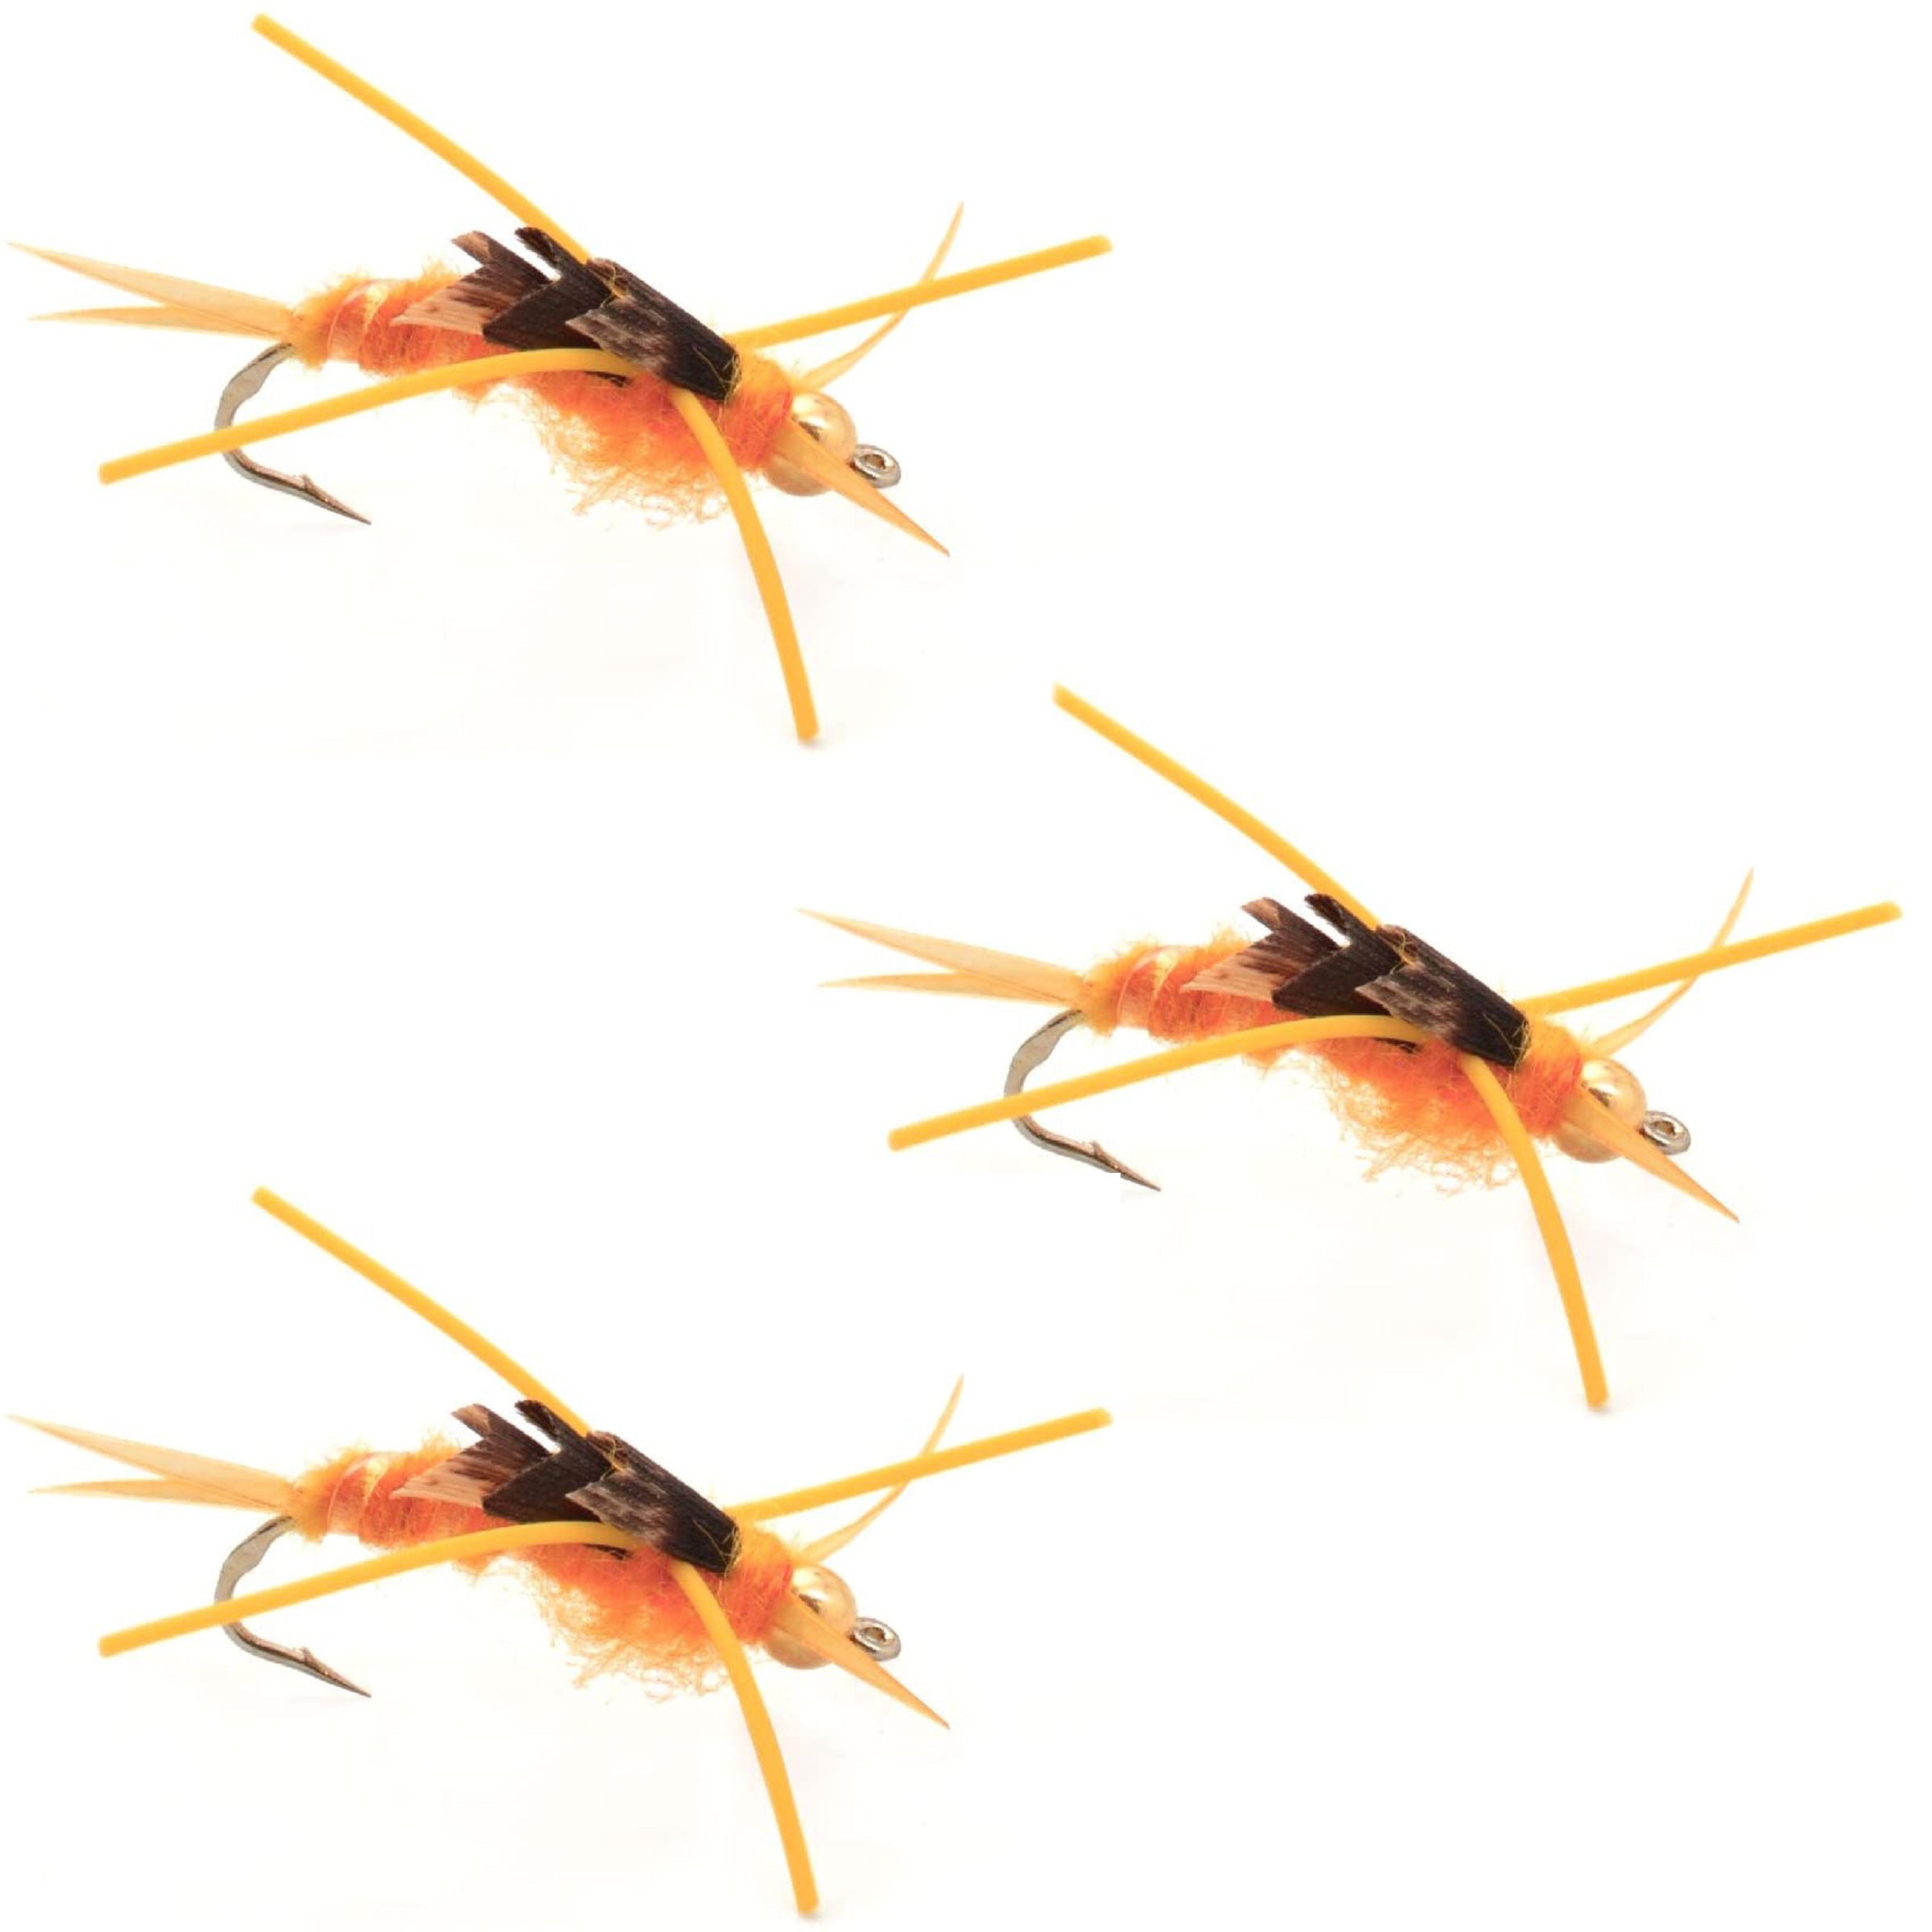 3 Pack Gold Bead Kaufmann's Golden Stone Fly with Rubber Legs - Stonefly Wet Fly - Hook Size 8